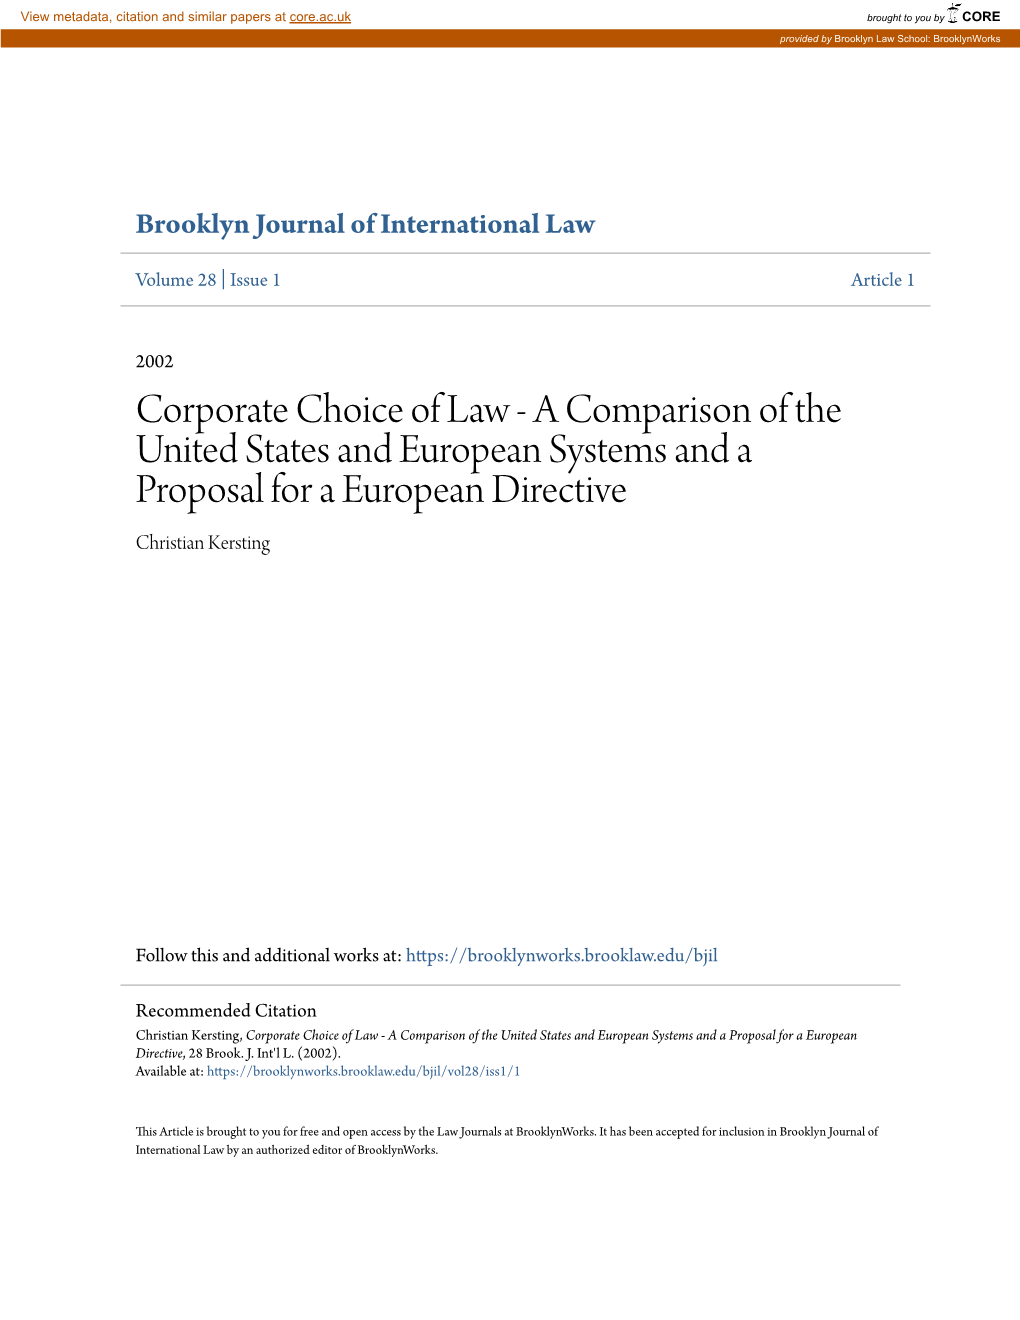 Corporate Choice of Law - a Comparison of the United States and European Systems and a Proposal for a European Directive Christian Kersting